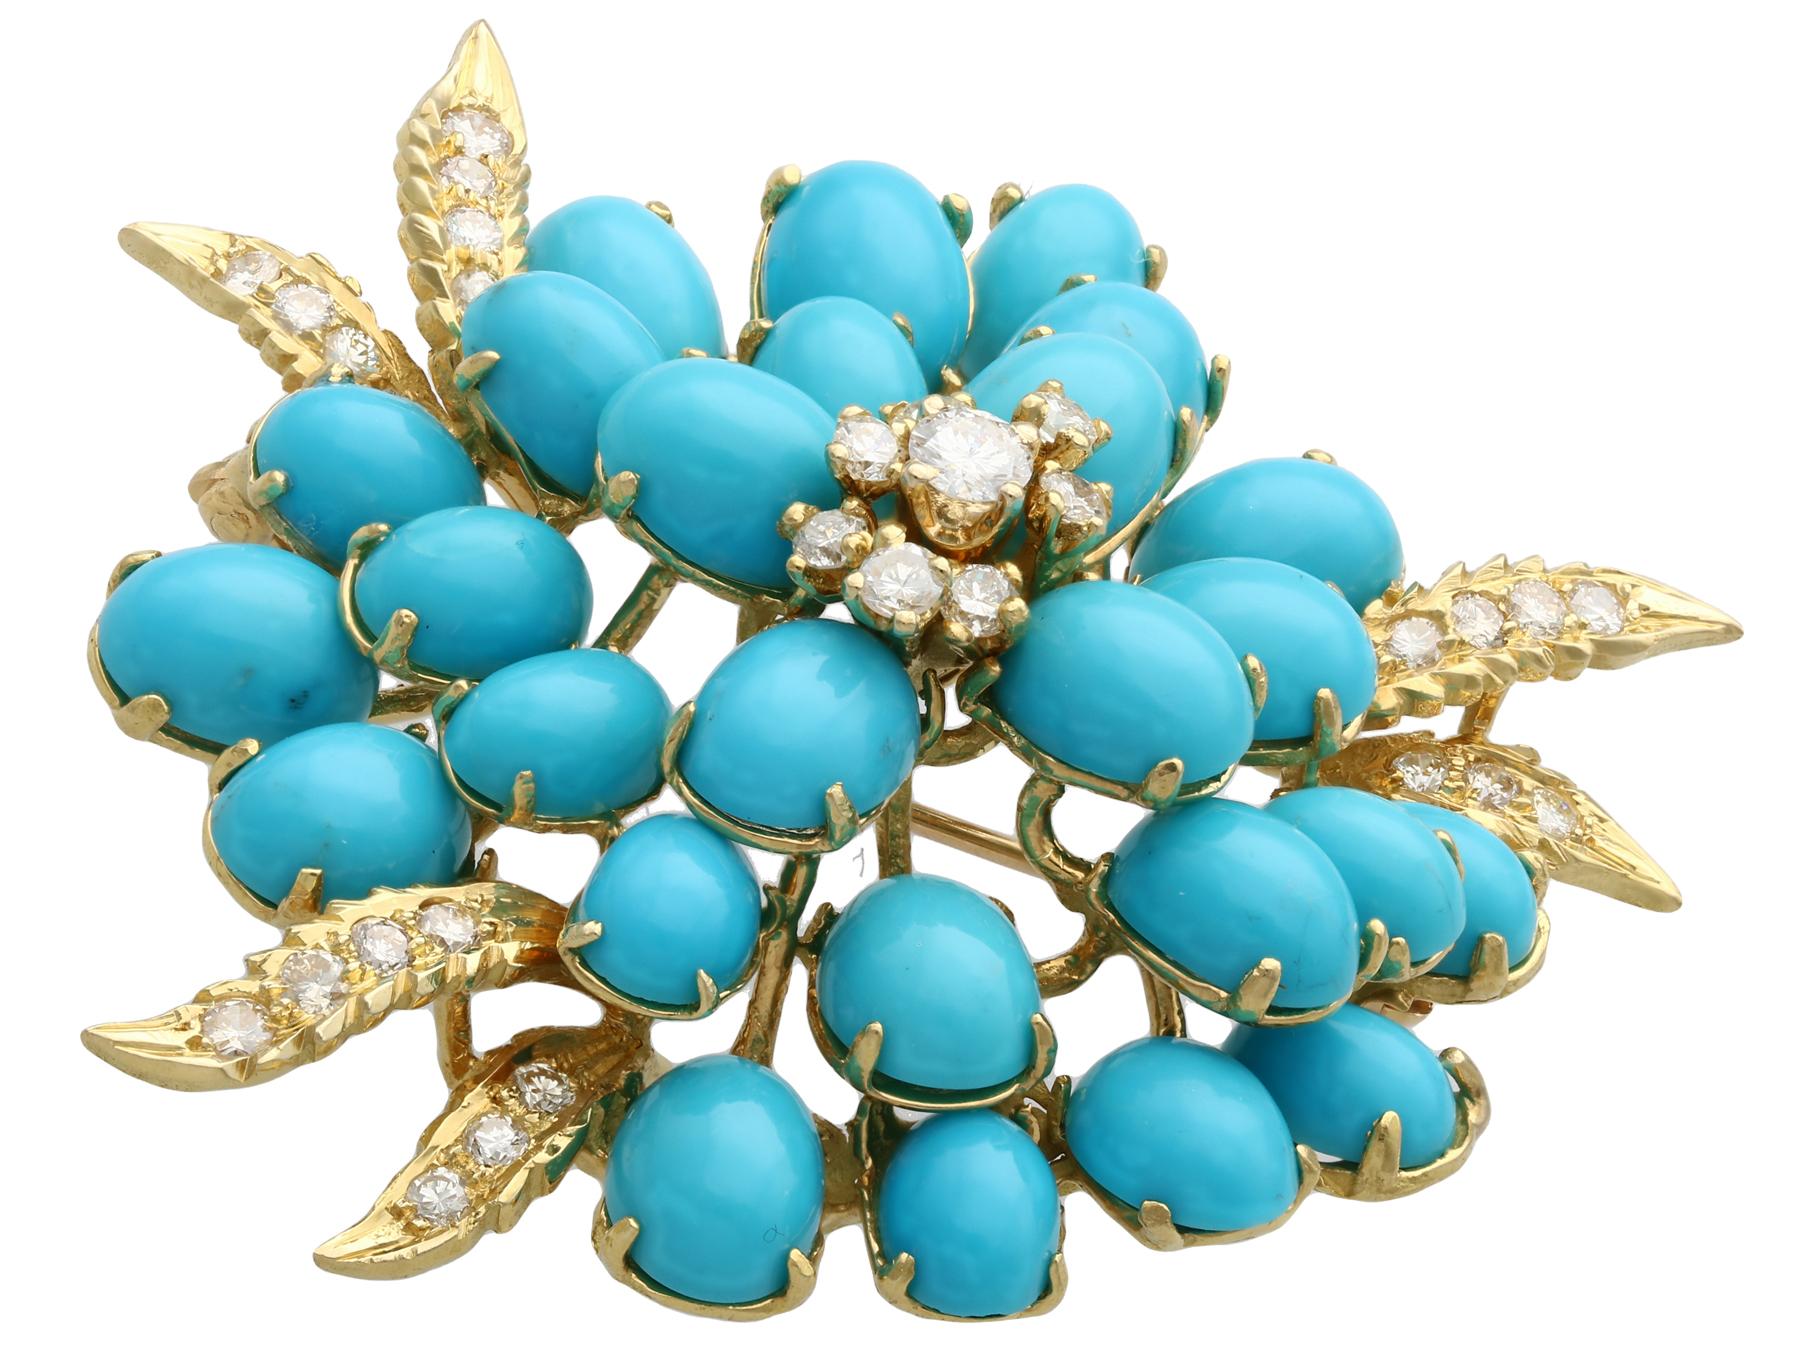 A stunning, fine and impressive 26.22 carat turquoise and 1.15 carat diamond, 18 karat yellow gold brooch; part of our diverse gemstone jewellery and estate jewelry collections.

This fine and impressive Turquoise vintage brooch has been crafted in